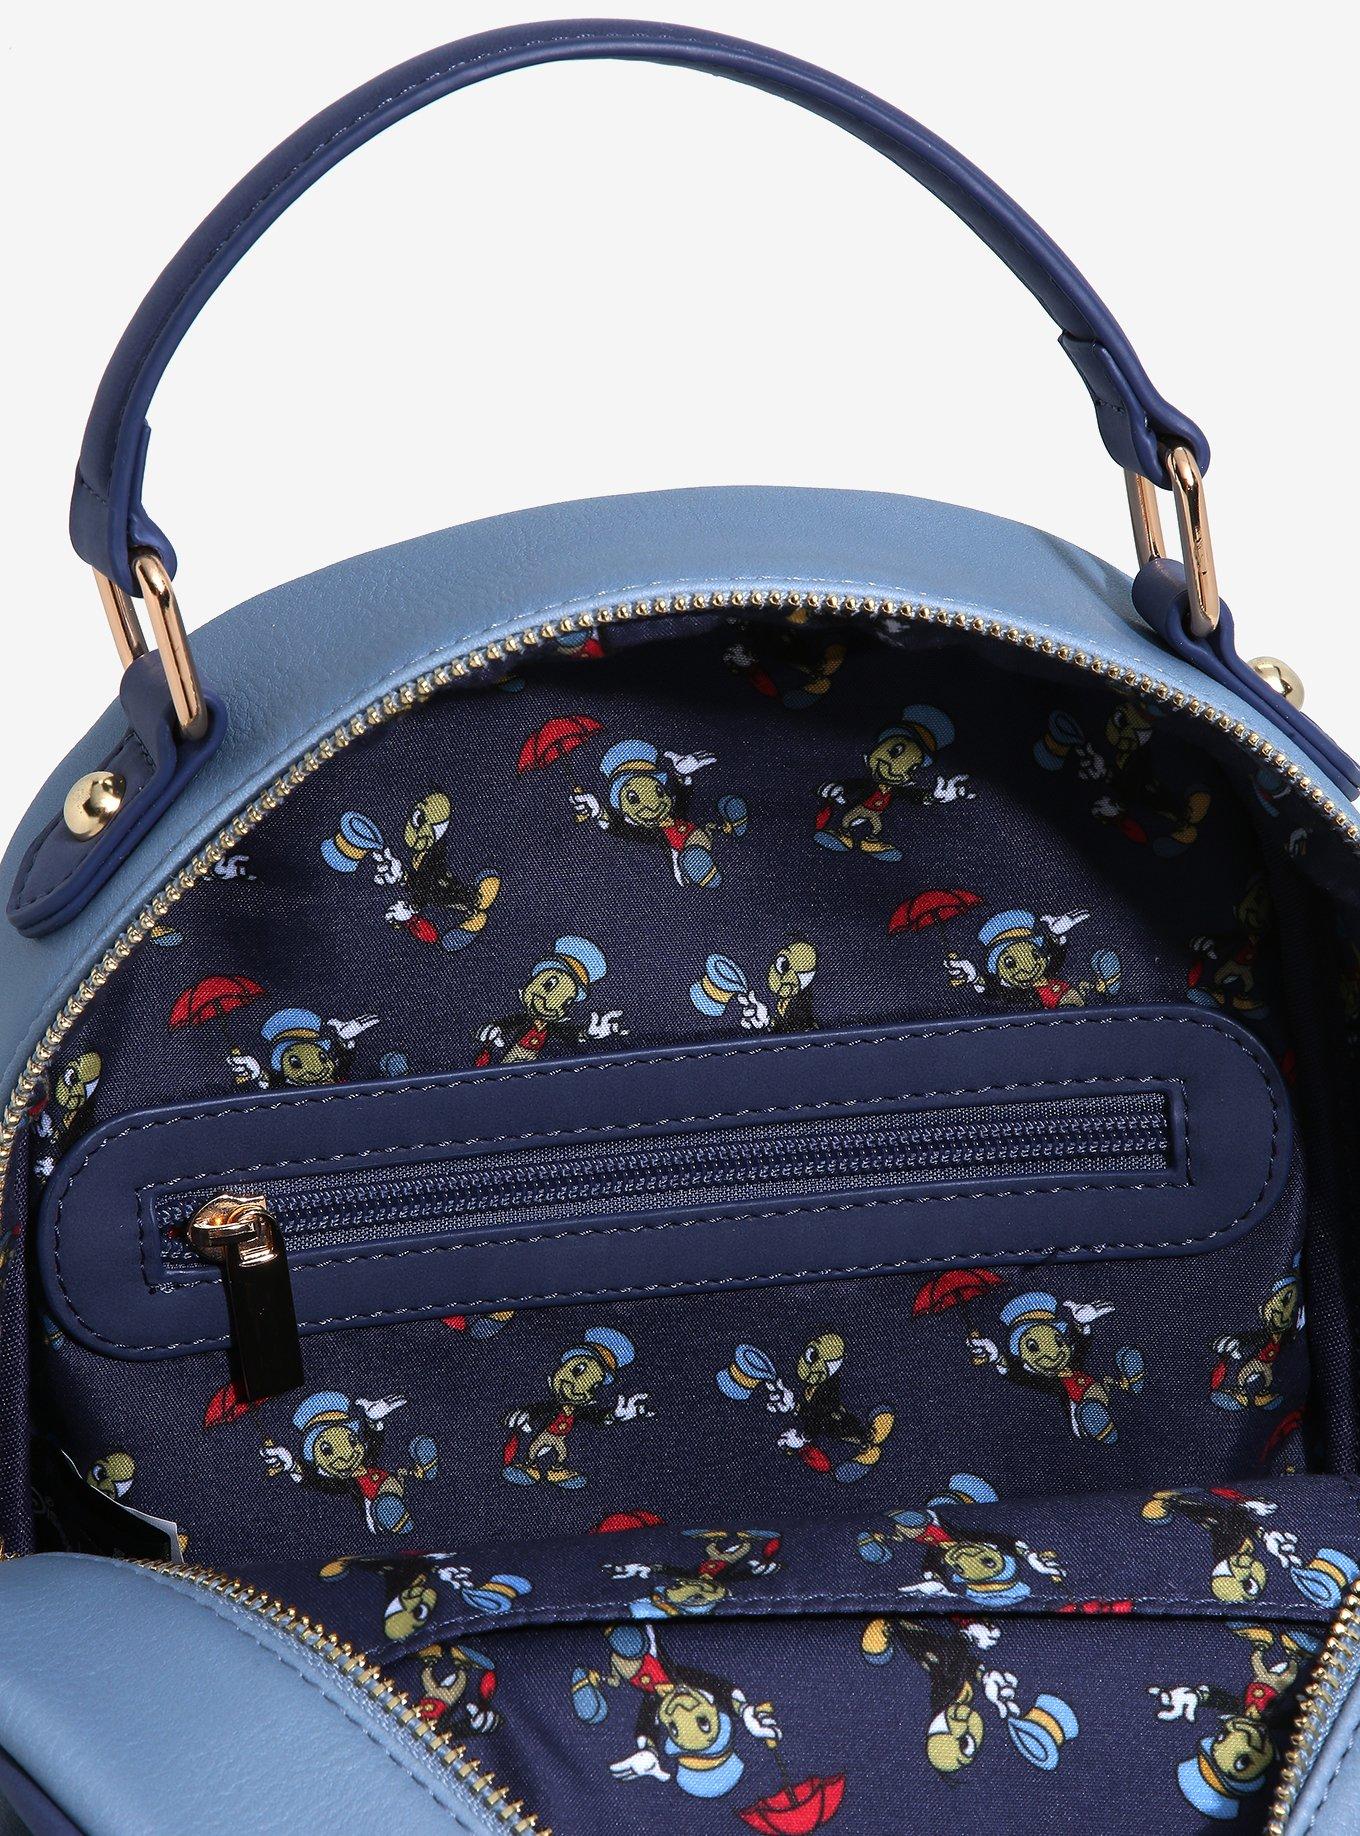 Our Universe Disney Pinocchio Monstro Mini Backpack Bag Exclusive Whale New